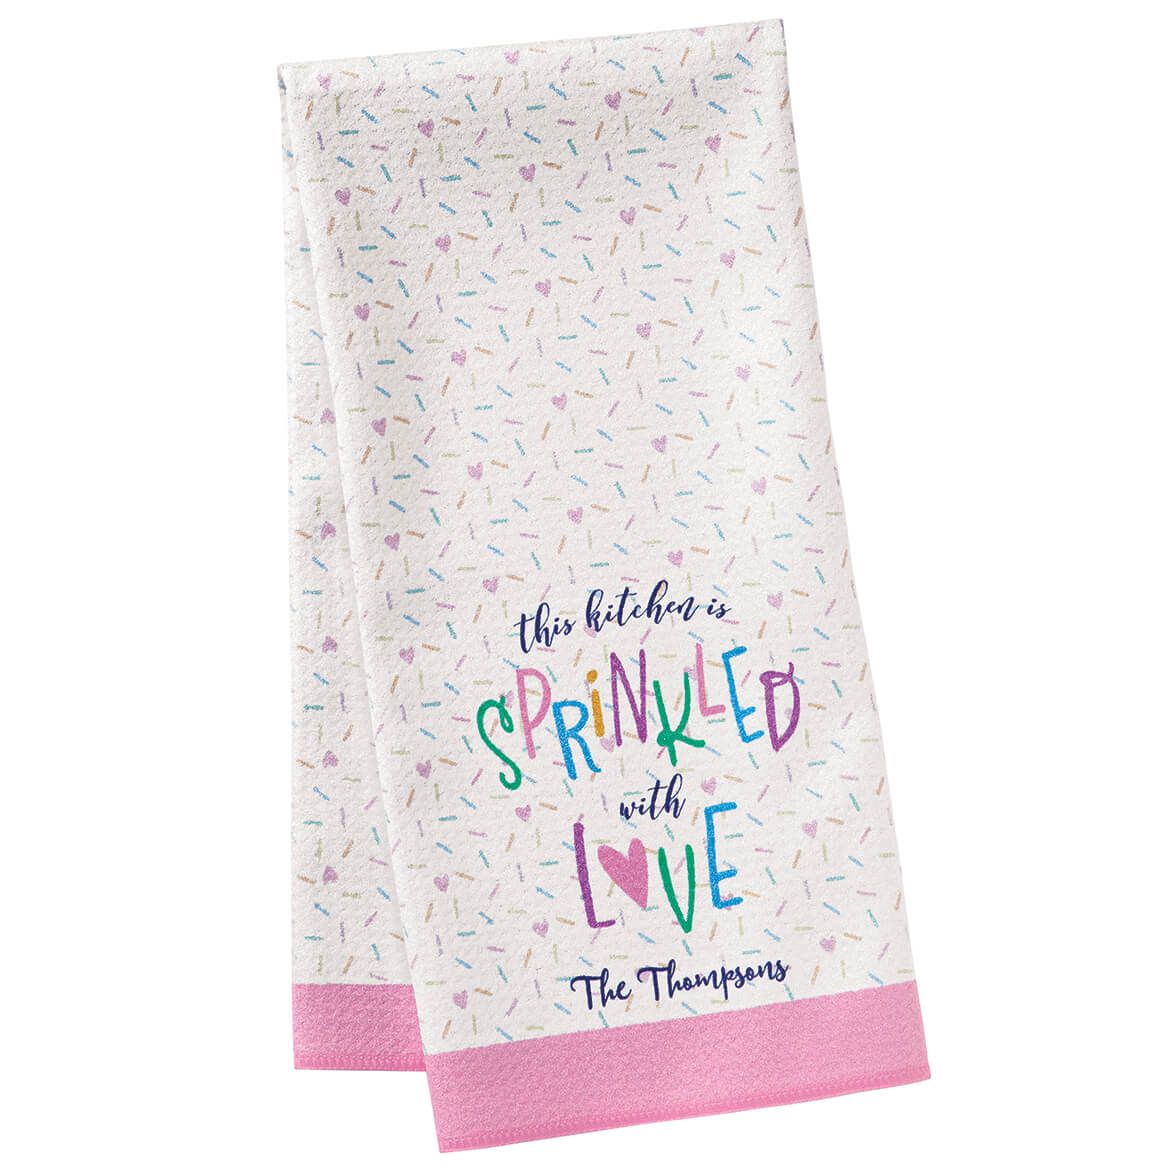 Personalized Sprinkled with Love Towel by Home Marketplace + '-' + 376611